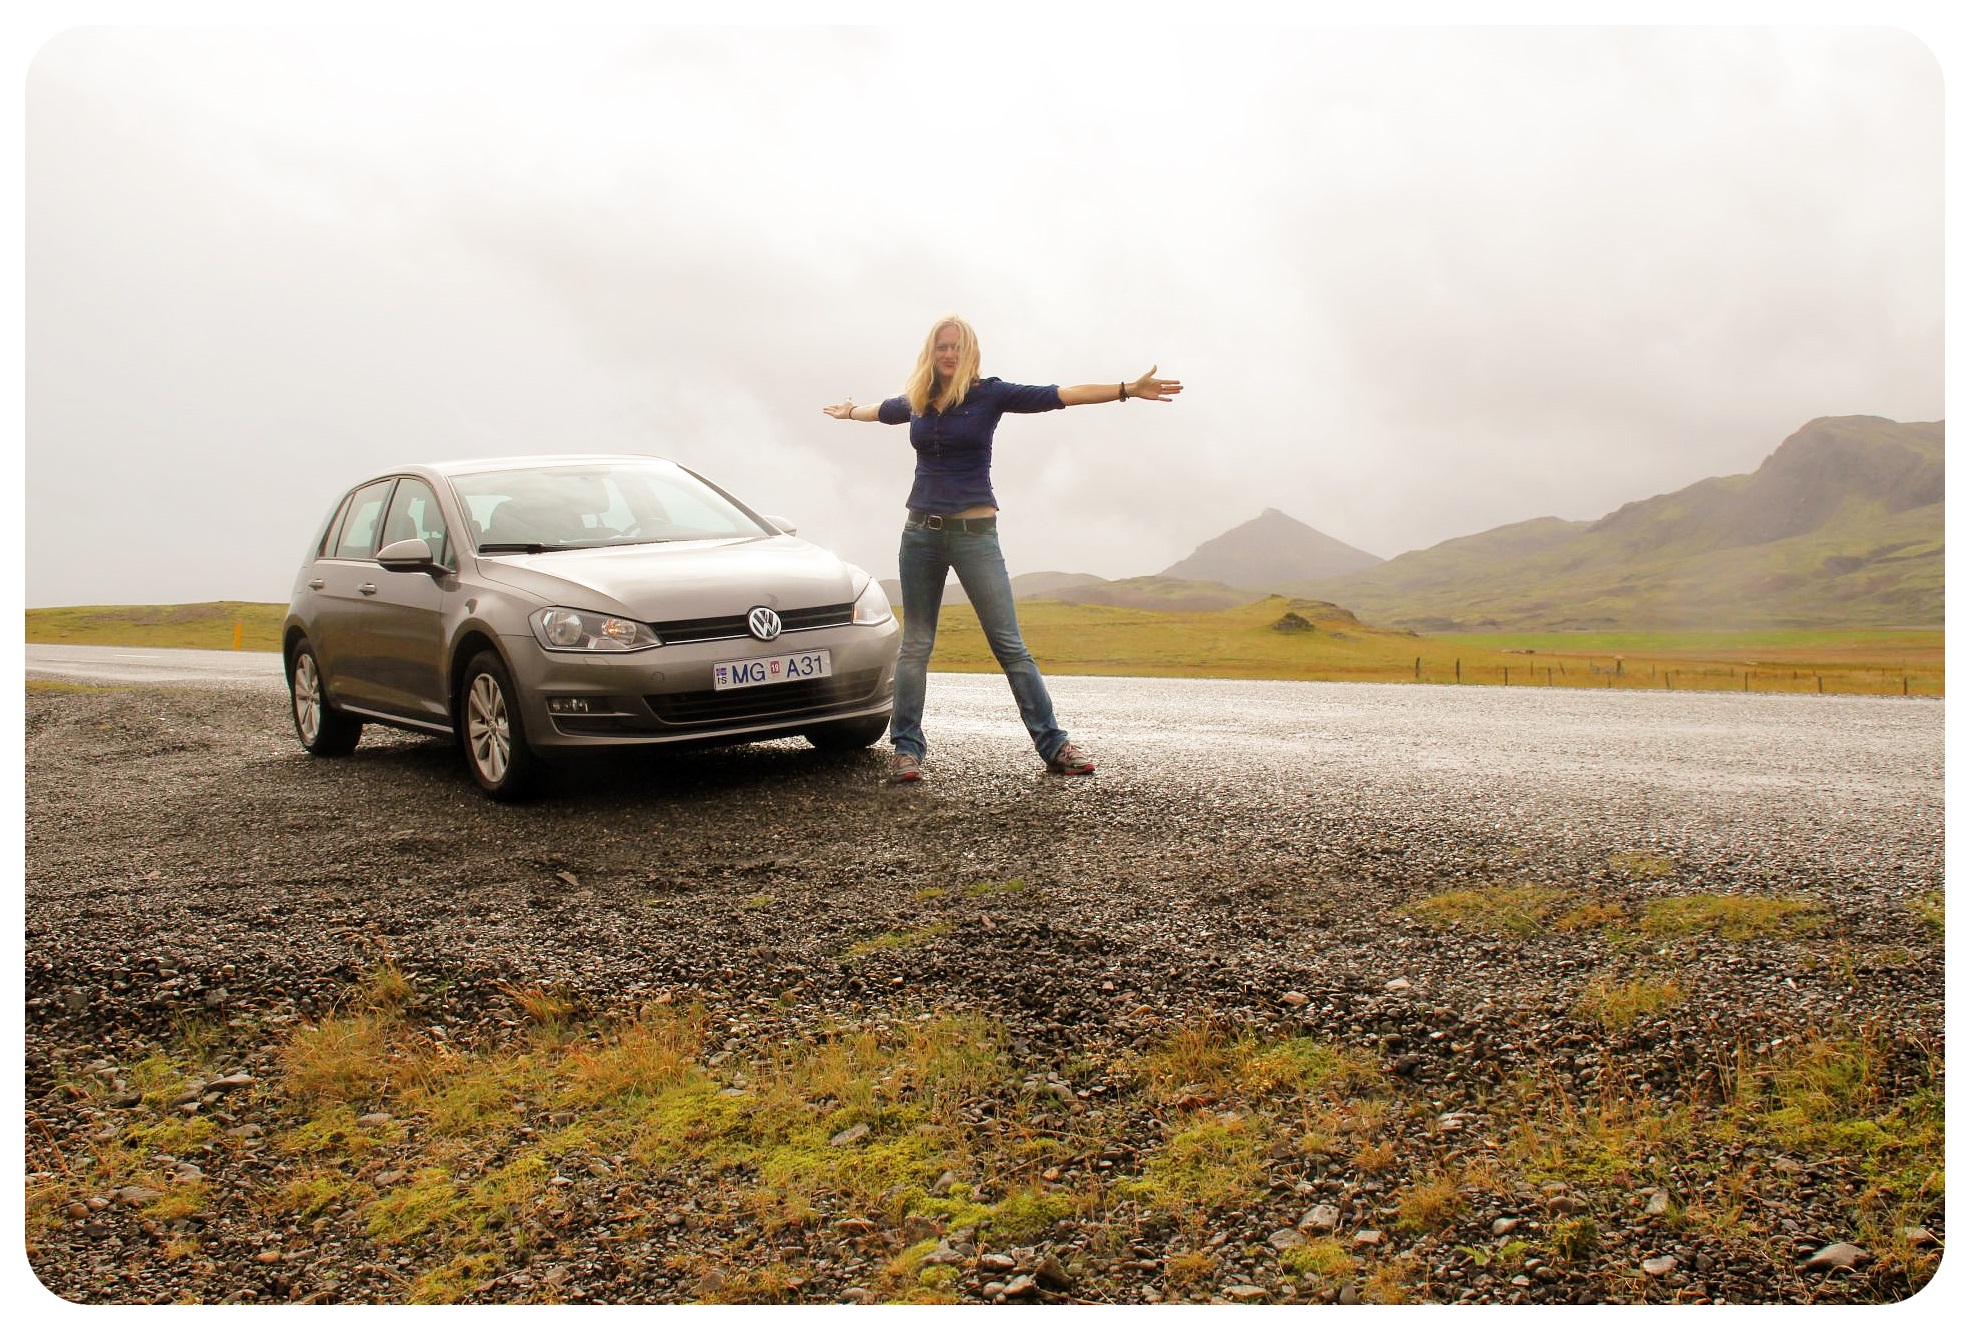 Three Reasons Why Road Tripping is the Best Way to See Iceland